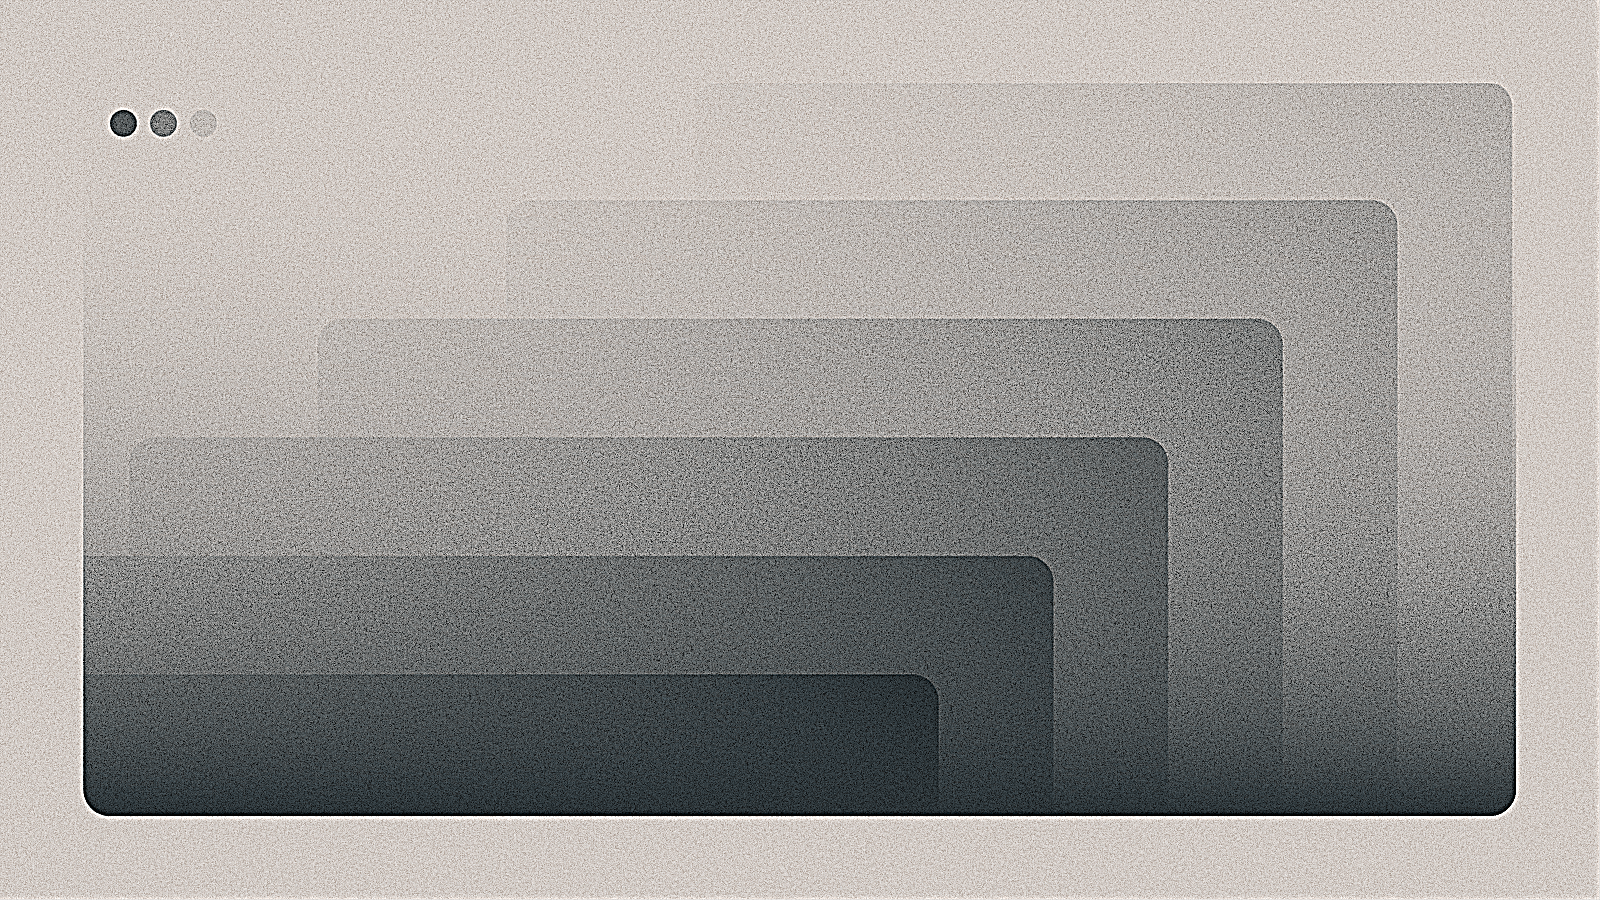 Abstracted, monochromatic design of a browser window with several tabs open within it.